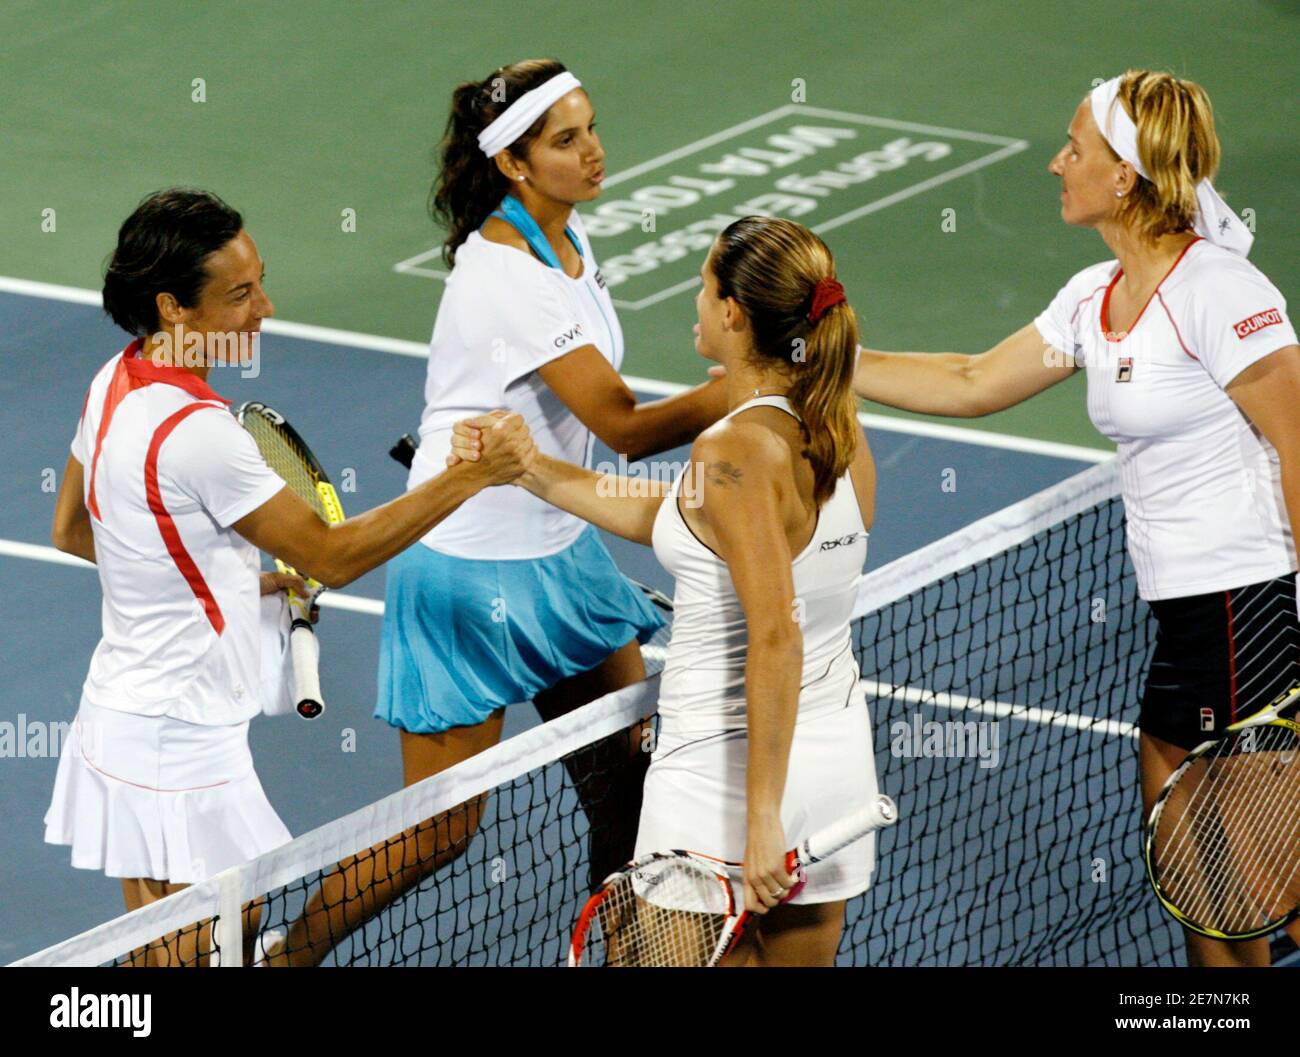 India's Sania Mirza and team mate Francesca Schiavone from Italy(L) shake hands with Russia's Svetlana Kuznetsova(front right) and Amelie Mauresmo of France(front) after their women's doubles match on the first day of the WTA Dubai Tennis Championships February 25, 2008. REUTERS/Jumana El Heloueh (UNITED ARAB EMIRATES) Stock Photo